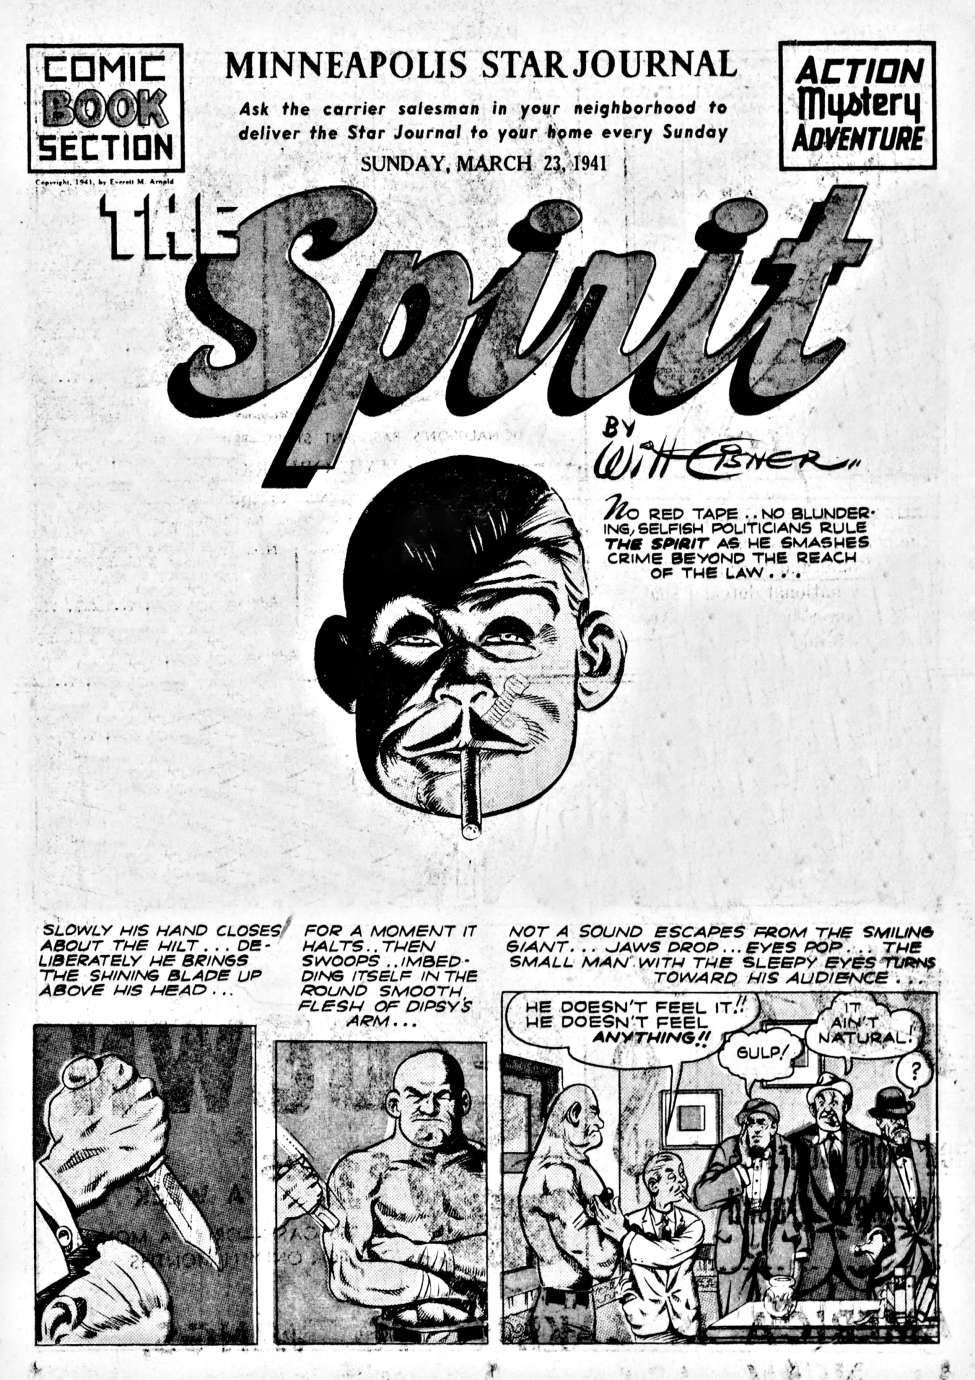 Book Cover For The Spirit (1941-03-23) - Minneapolis Star Journal (b/w)